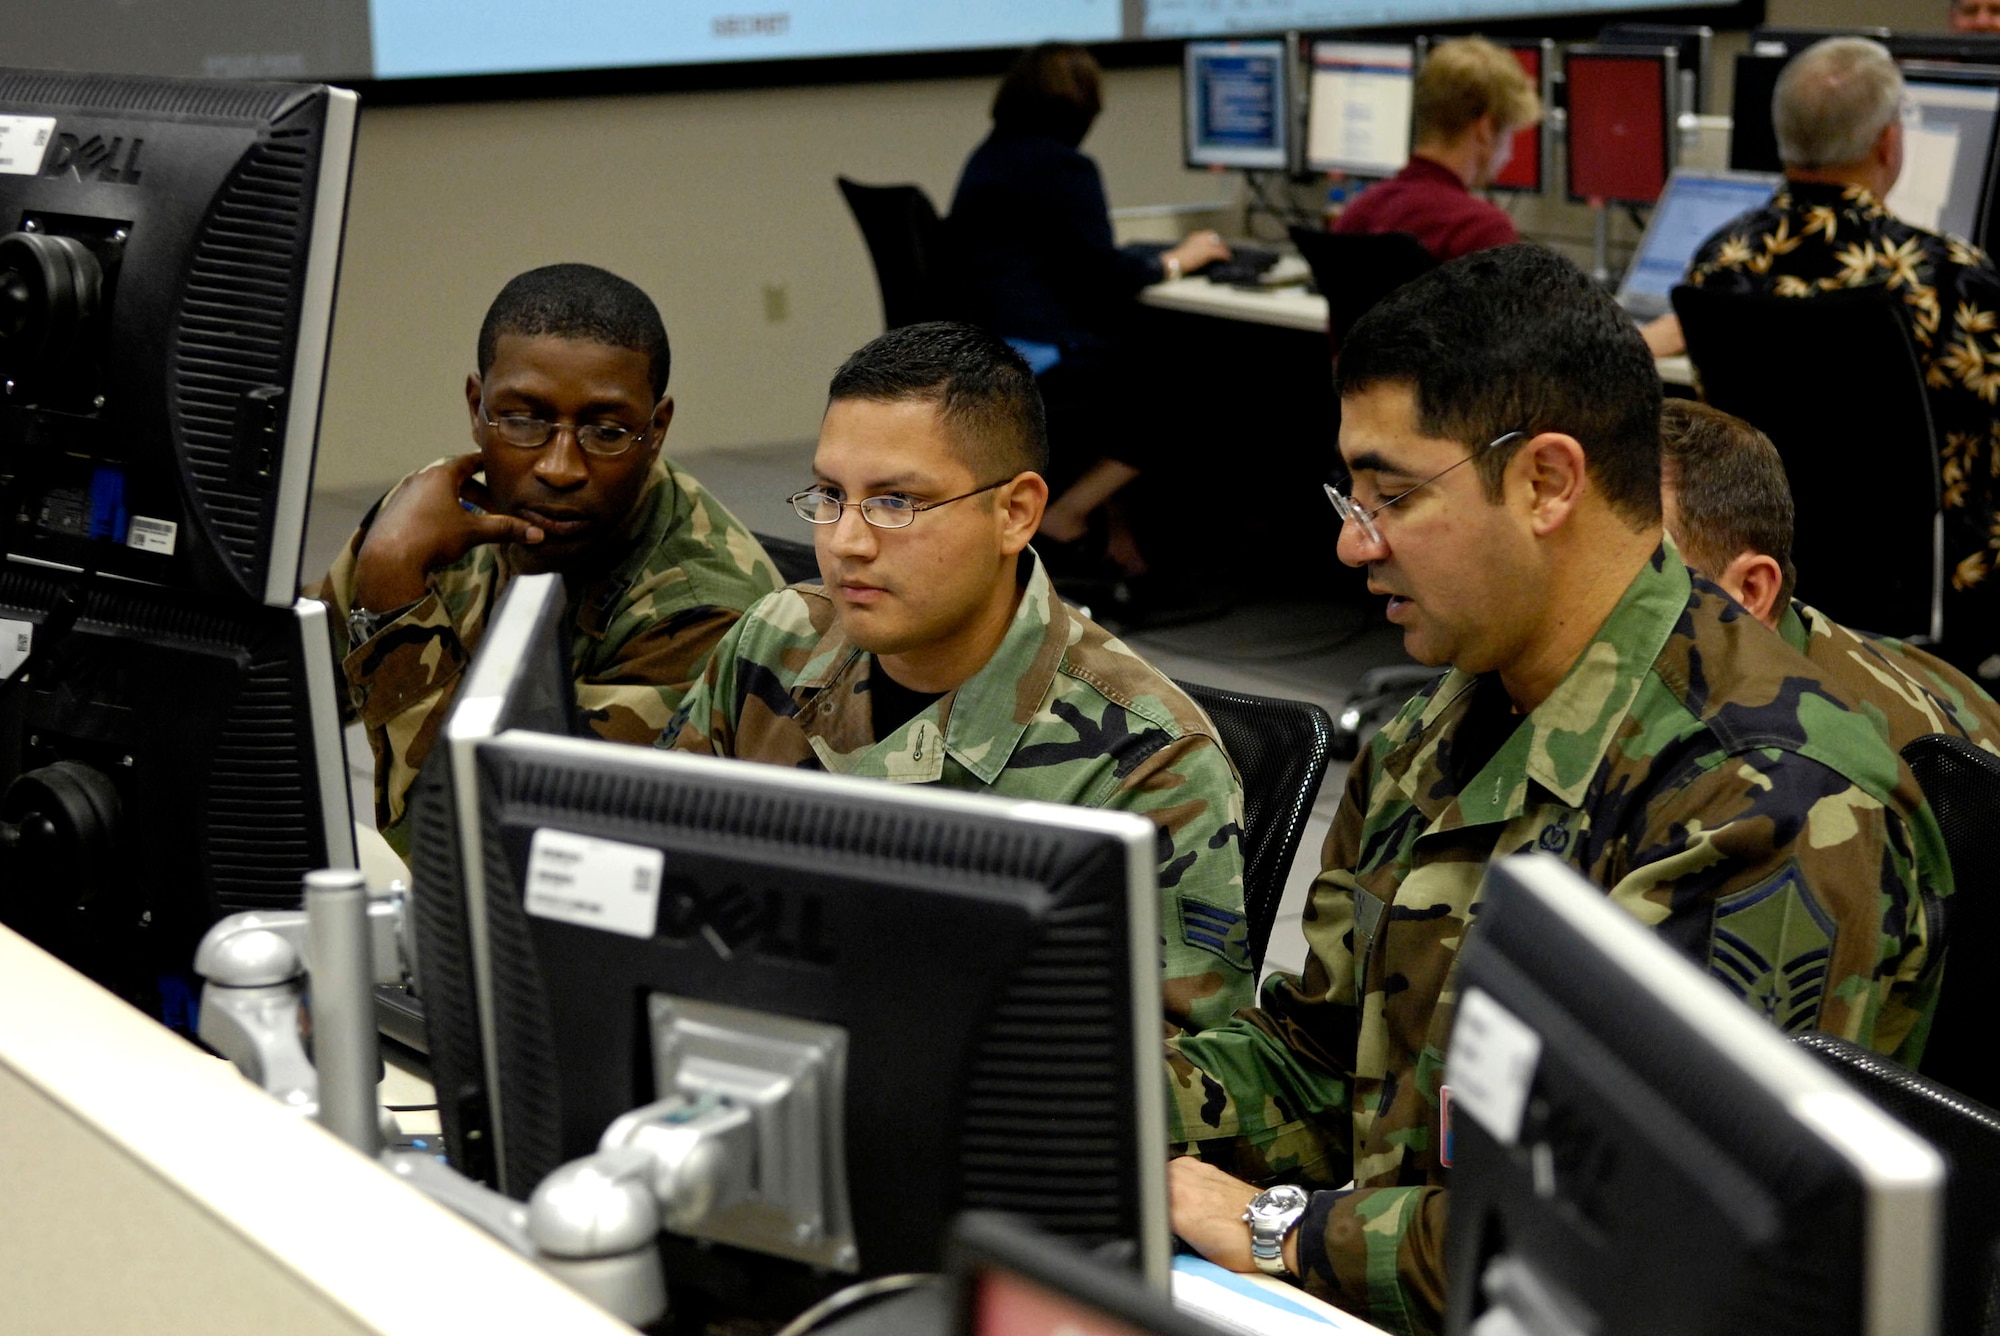 Members of the personnel recovery coordination cell discuss a downed pilot recovery mission during Exercise Valiant Shield Aug. 7 in the Air and Space Operation Center at Hickam Air Force Base, Hawaii. The Airmen are from the 613th Air Operations Center. Valiant Shield is a week-long exercise that tests the military's ability to rapidly consolidate joint forces in response to regional contingencies, involves approximately 22,000 troops, 30 ships and some 275 aircraft. (U.S. Air Force photo/Tech. Sgt. Shane A. Cuomo) 
